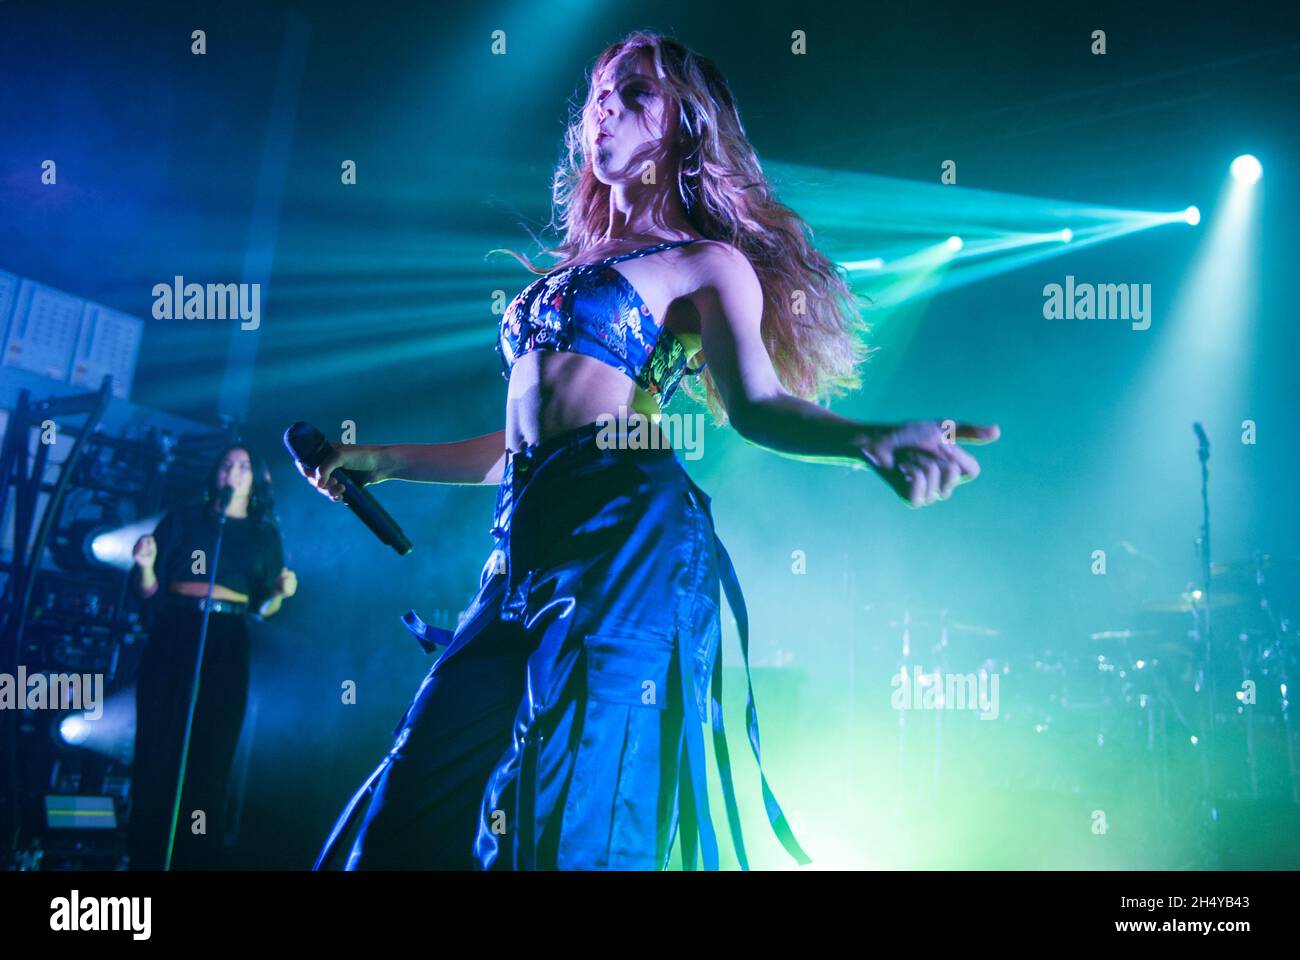 Zara Larsson performing live on stage at the O2 Academy in Birmingham, UK.  Picture date: Wednesday 25 October, 2017. Photo credit: Katja Ogrin/ EMPICS  Entertainment Stock Photo - Alamy